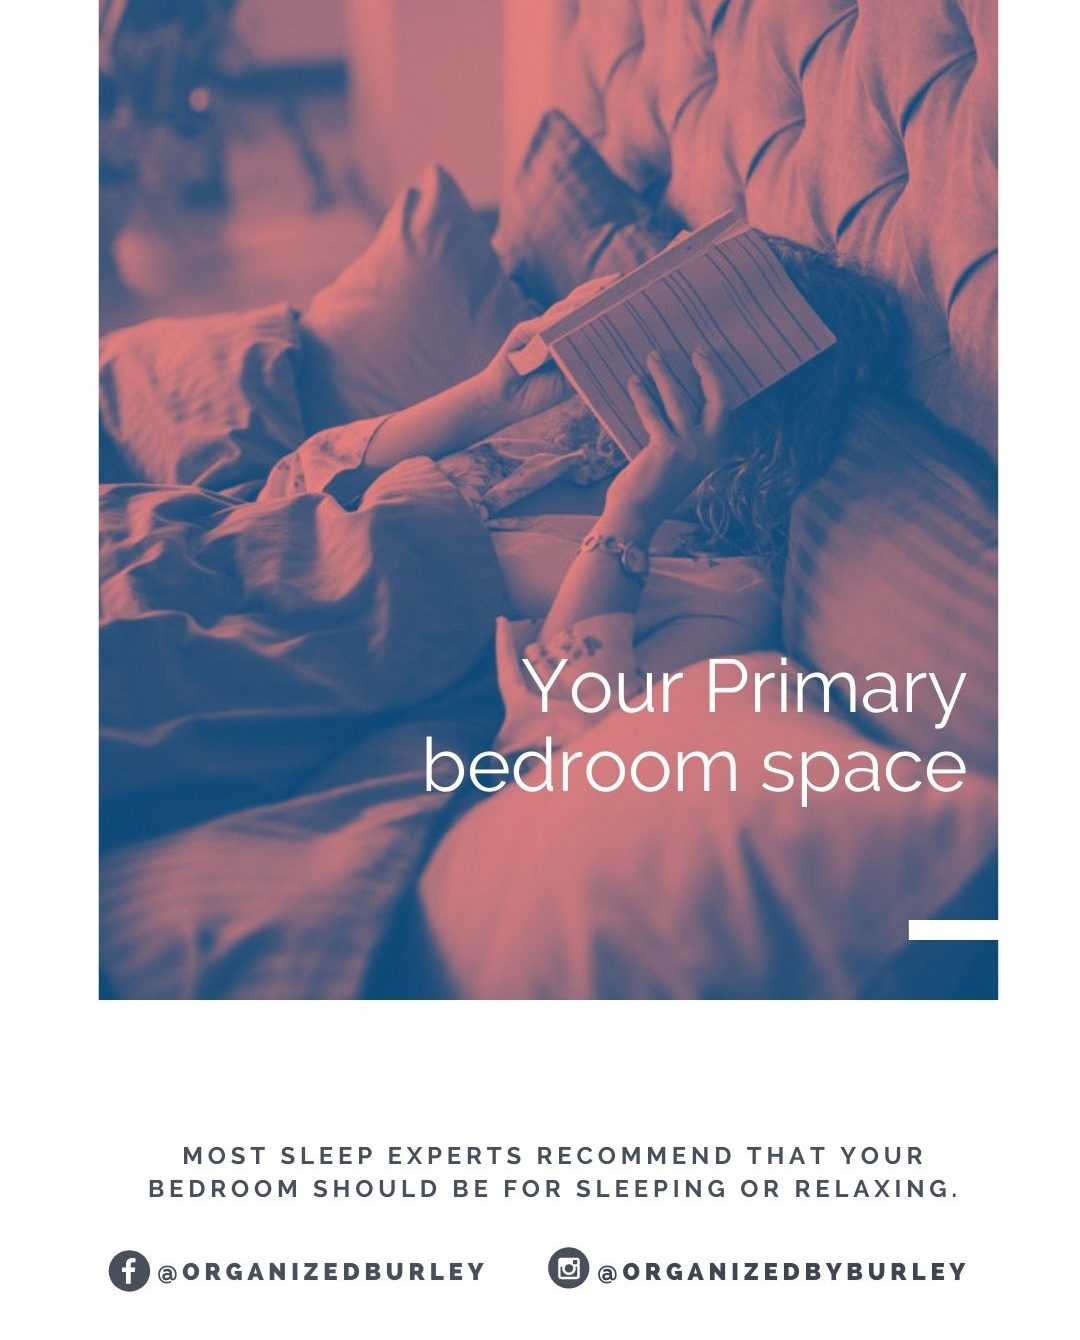 Organizing Your Primary bedroom space